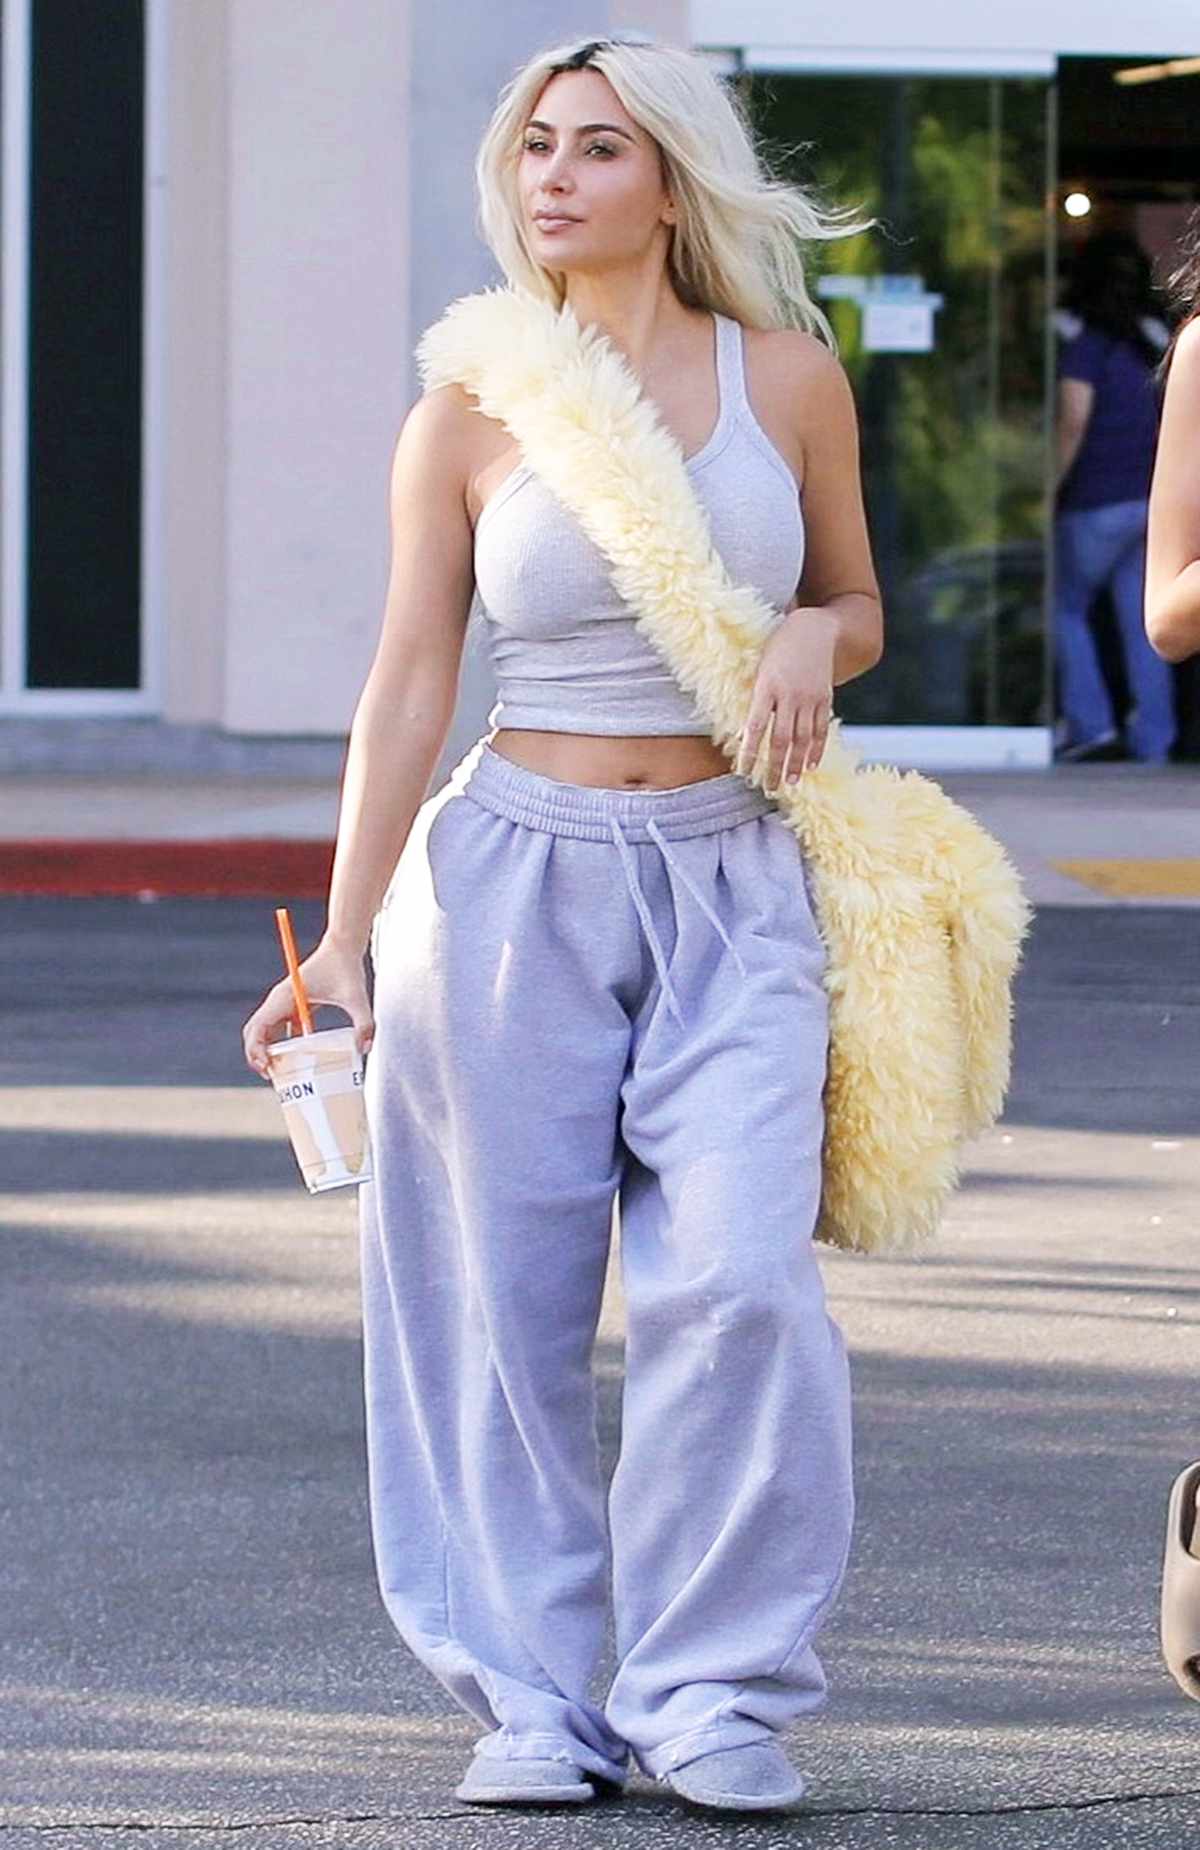 Kim Kardashian shops at Erehwon and sips on a smoothie with s friend while carrying a fluffy bag in Calabasas.